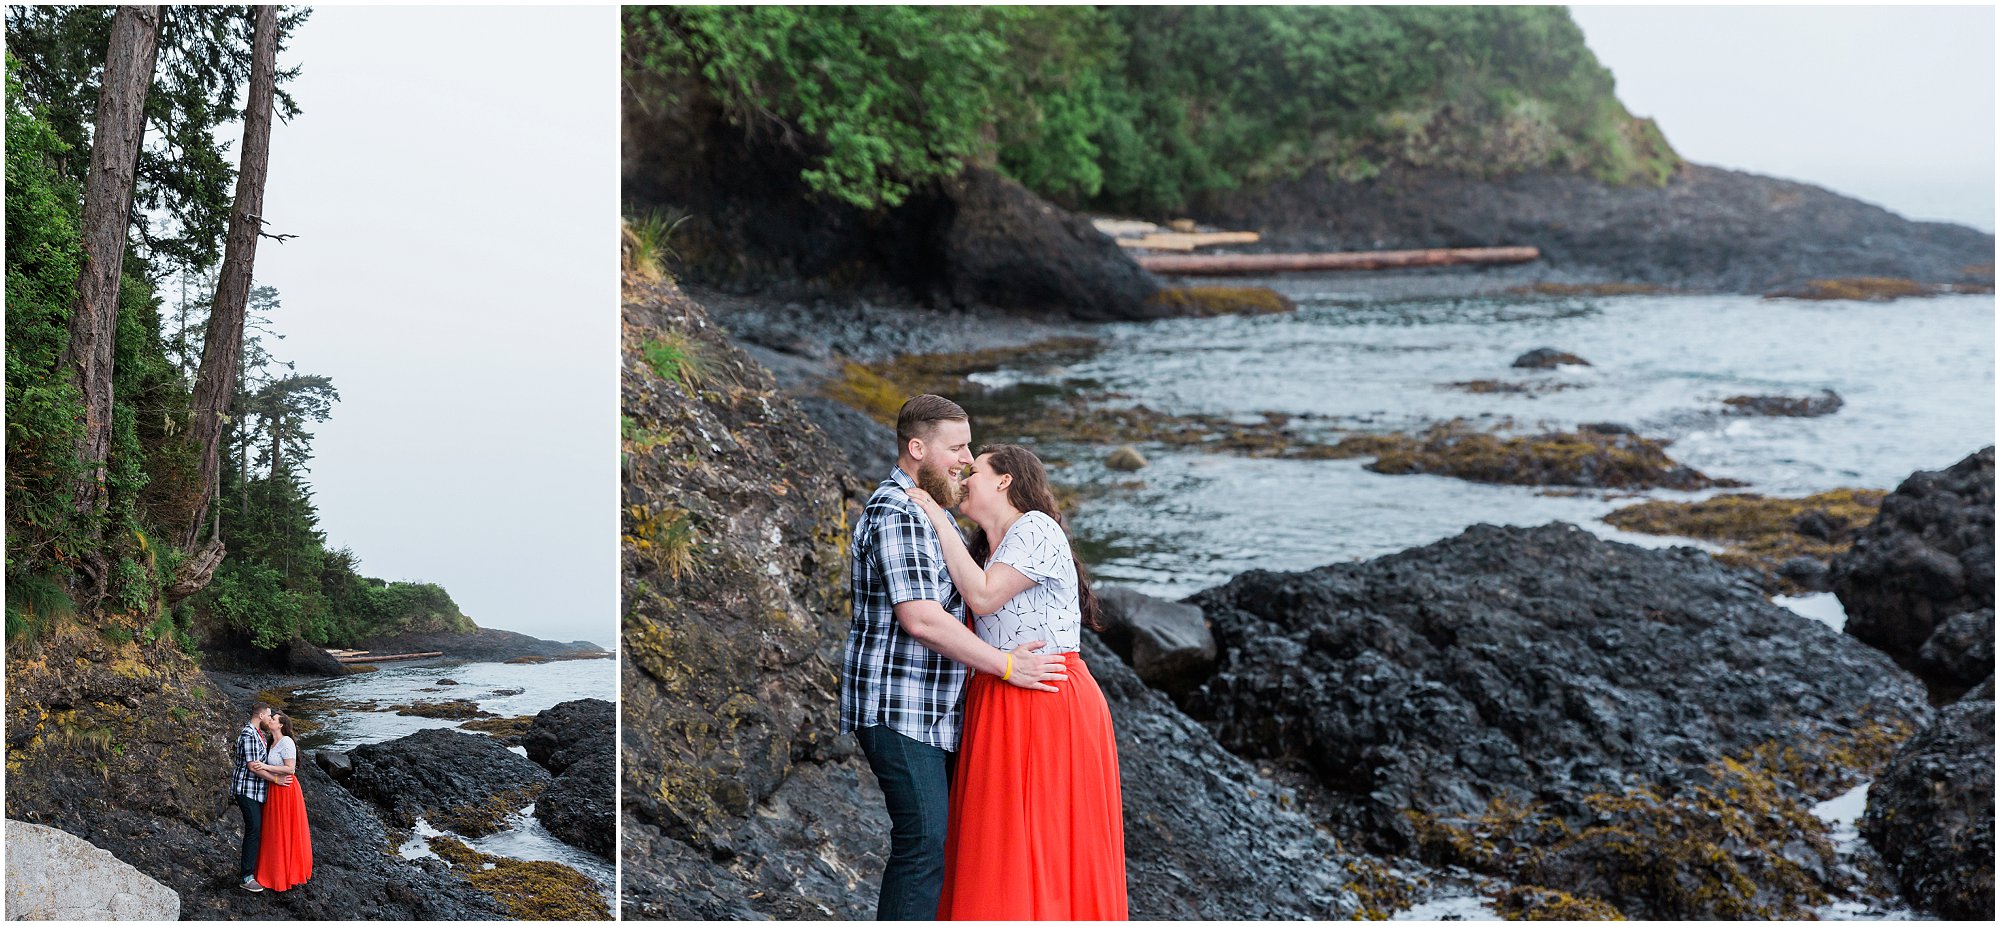 A perfect red flowy skirt pops against the greenery and foggy backdrop at this Washington Coast engagement photo session by Bend Oregon wedding photographer Erica Swantek. | Erica Swantek Photography